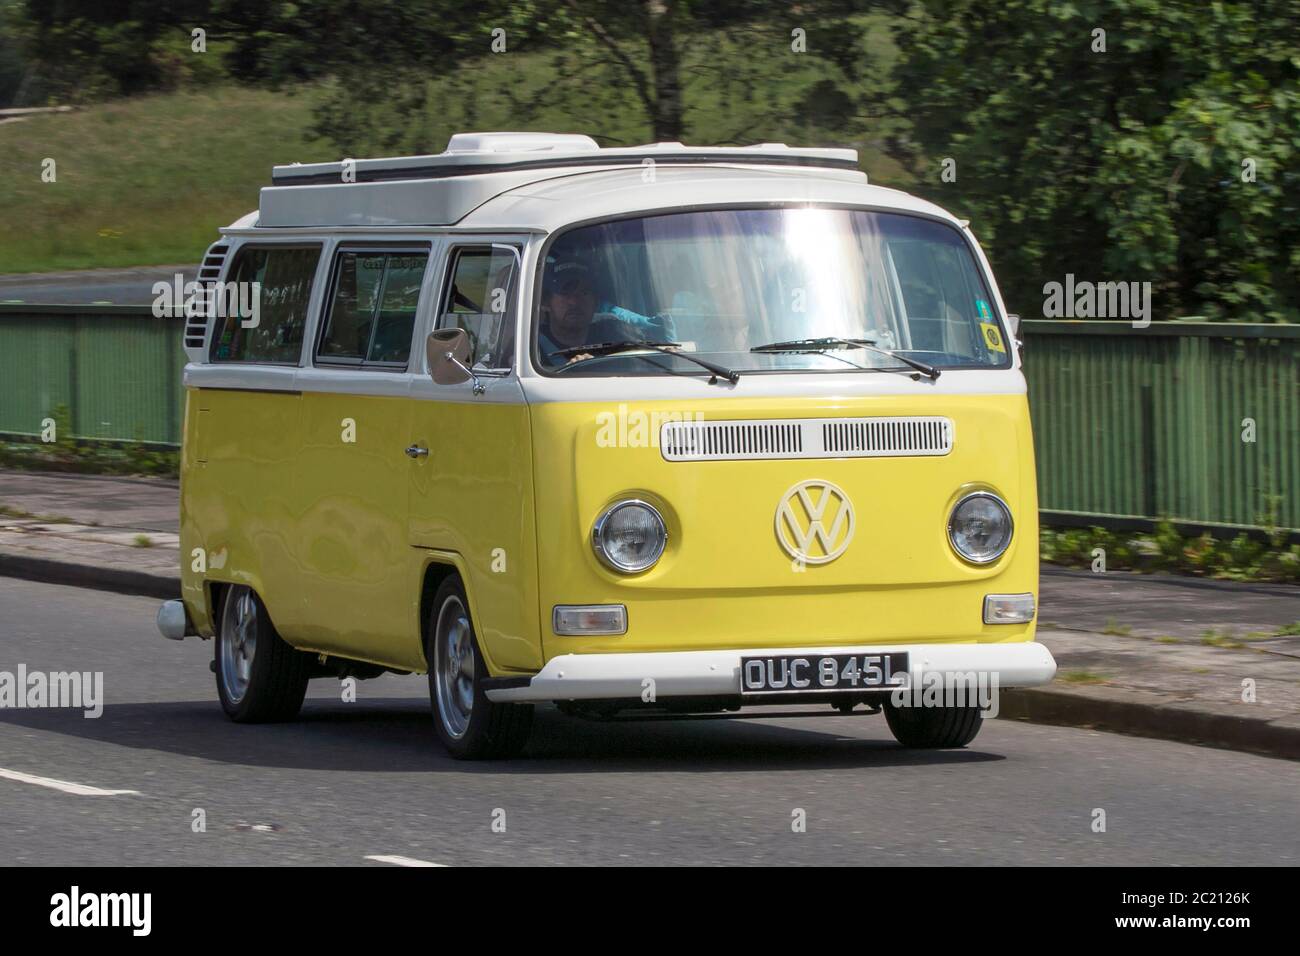 OUC845L VW Devon Moonraker. Touring campers and Motorhomes, campervans, RV leisure vehicle, family holidays, caravanette vacations, volkswagen Stock Photo